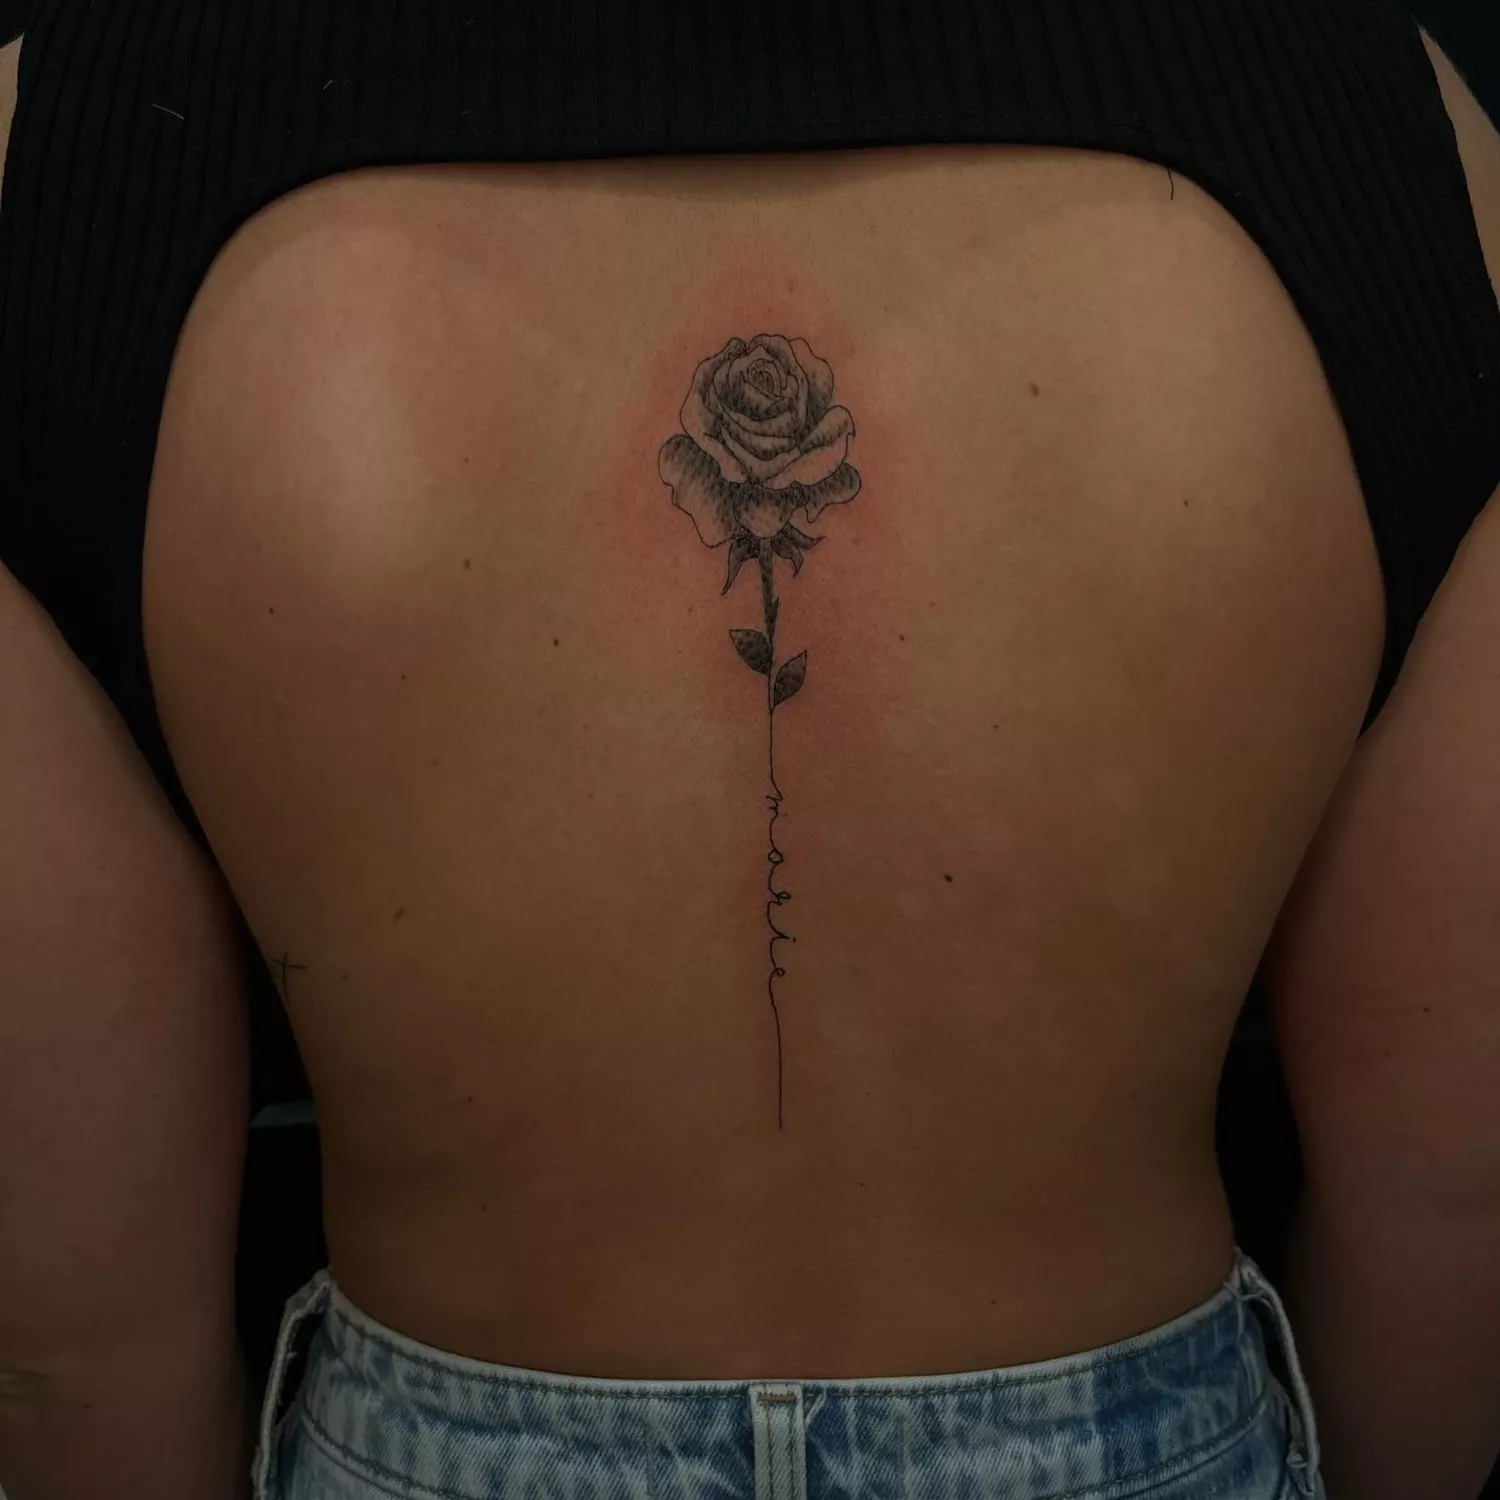 A close up of a rose stem tattoo on the spine.